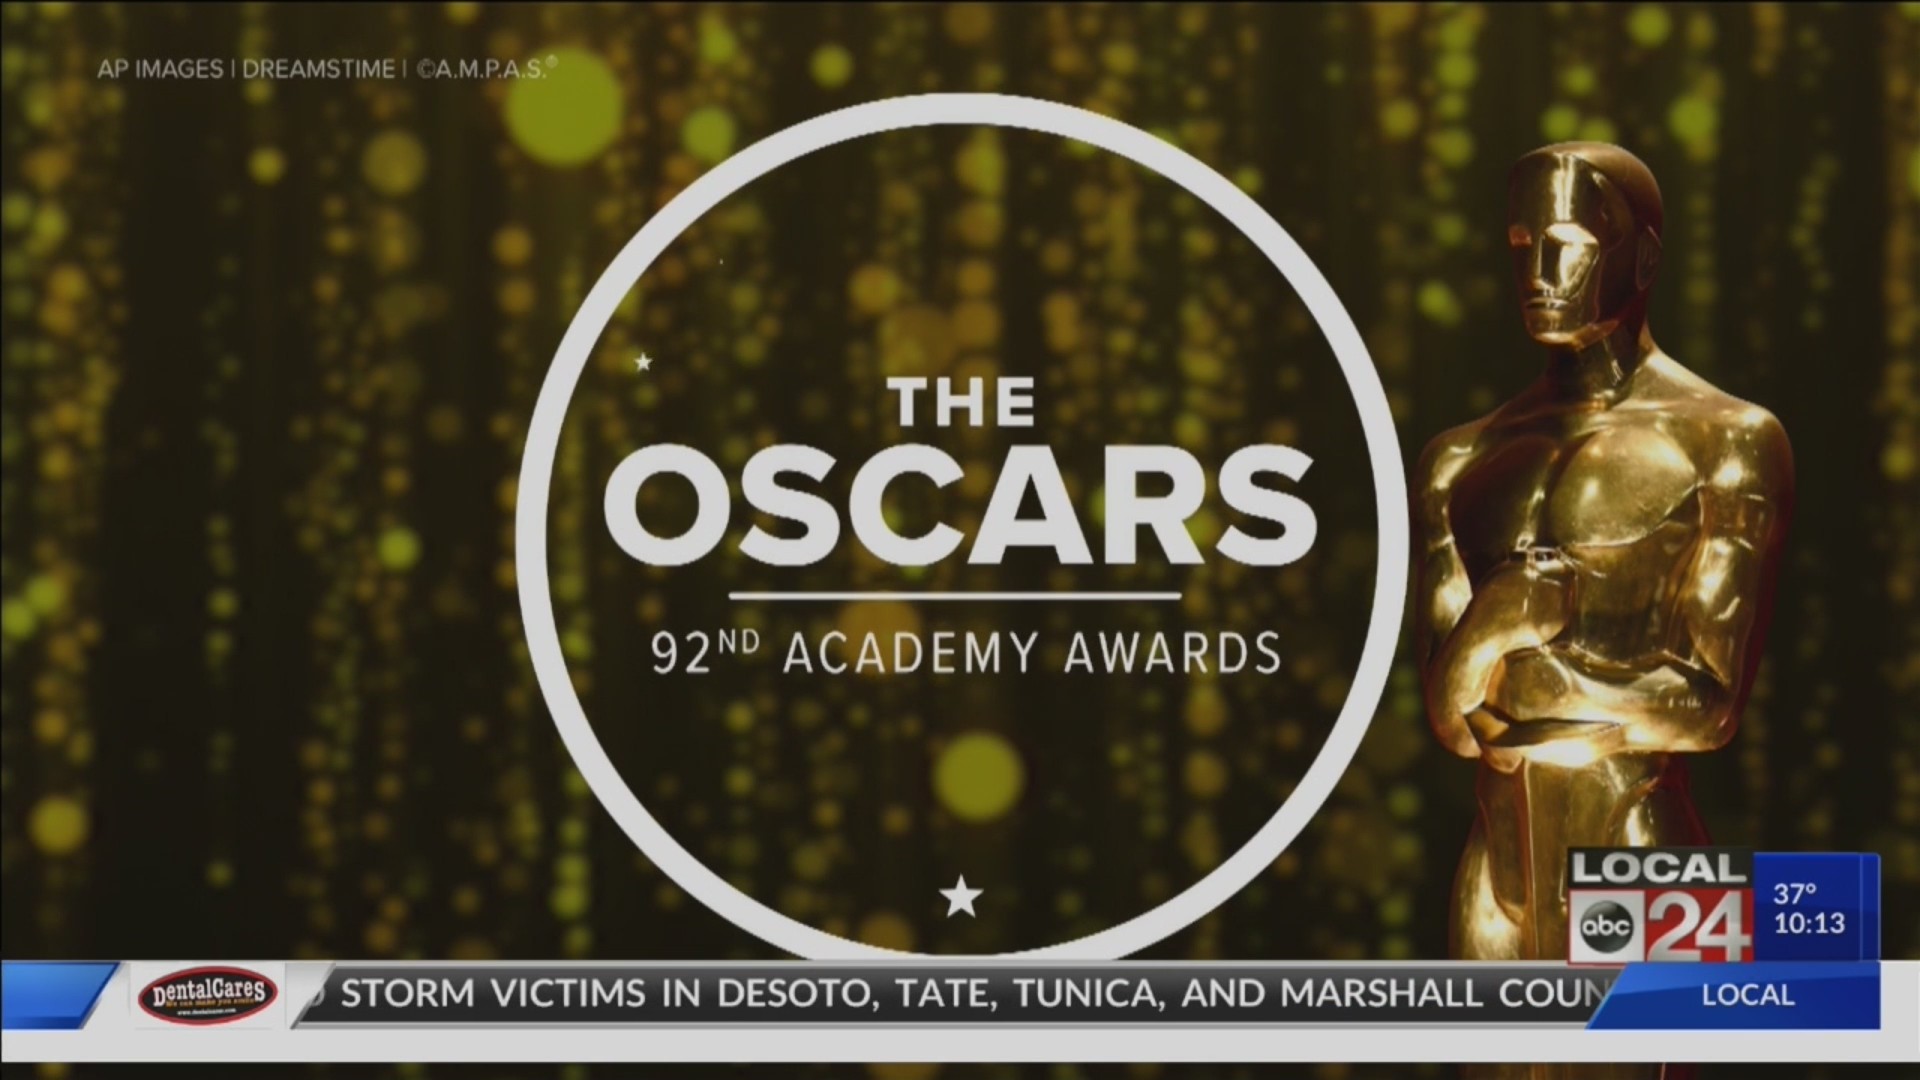 The Academy Awards’ history is filled with interesting stats and trivia